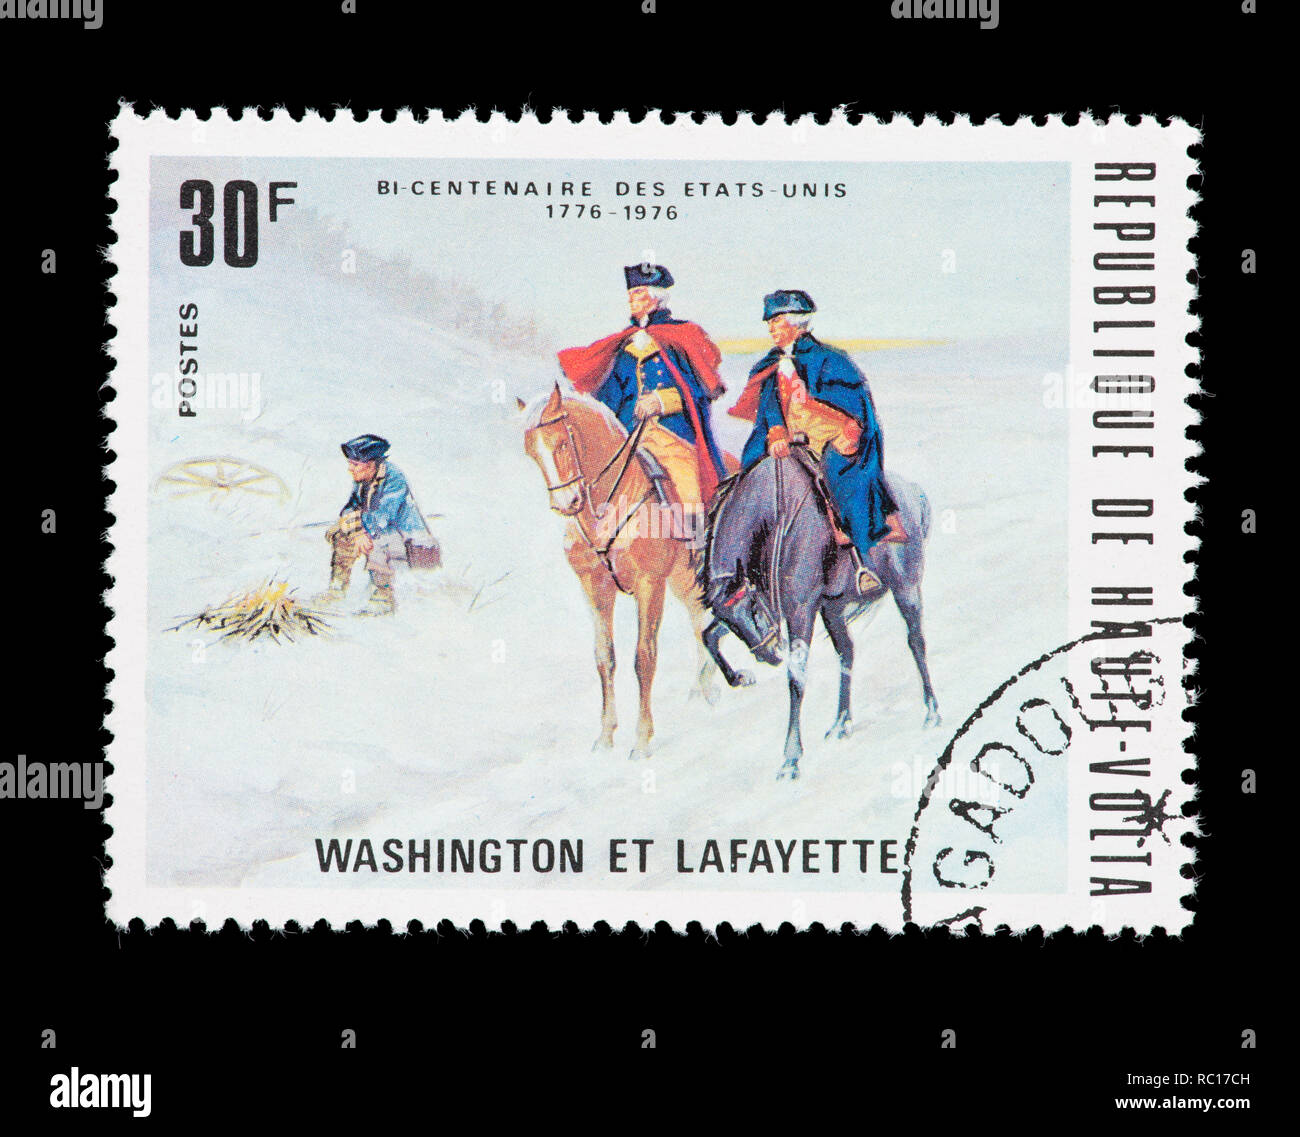 Postage stamp from Upper Volta (Burkina Faso) depicting a painting of Washington and Lafayette, United States bicentennial. Stock Photo